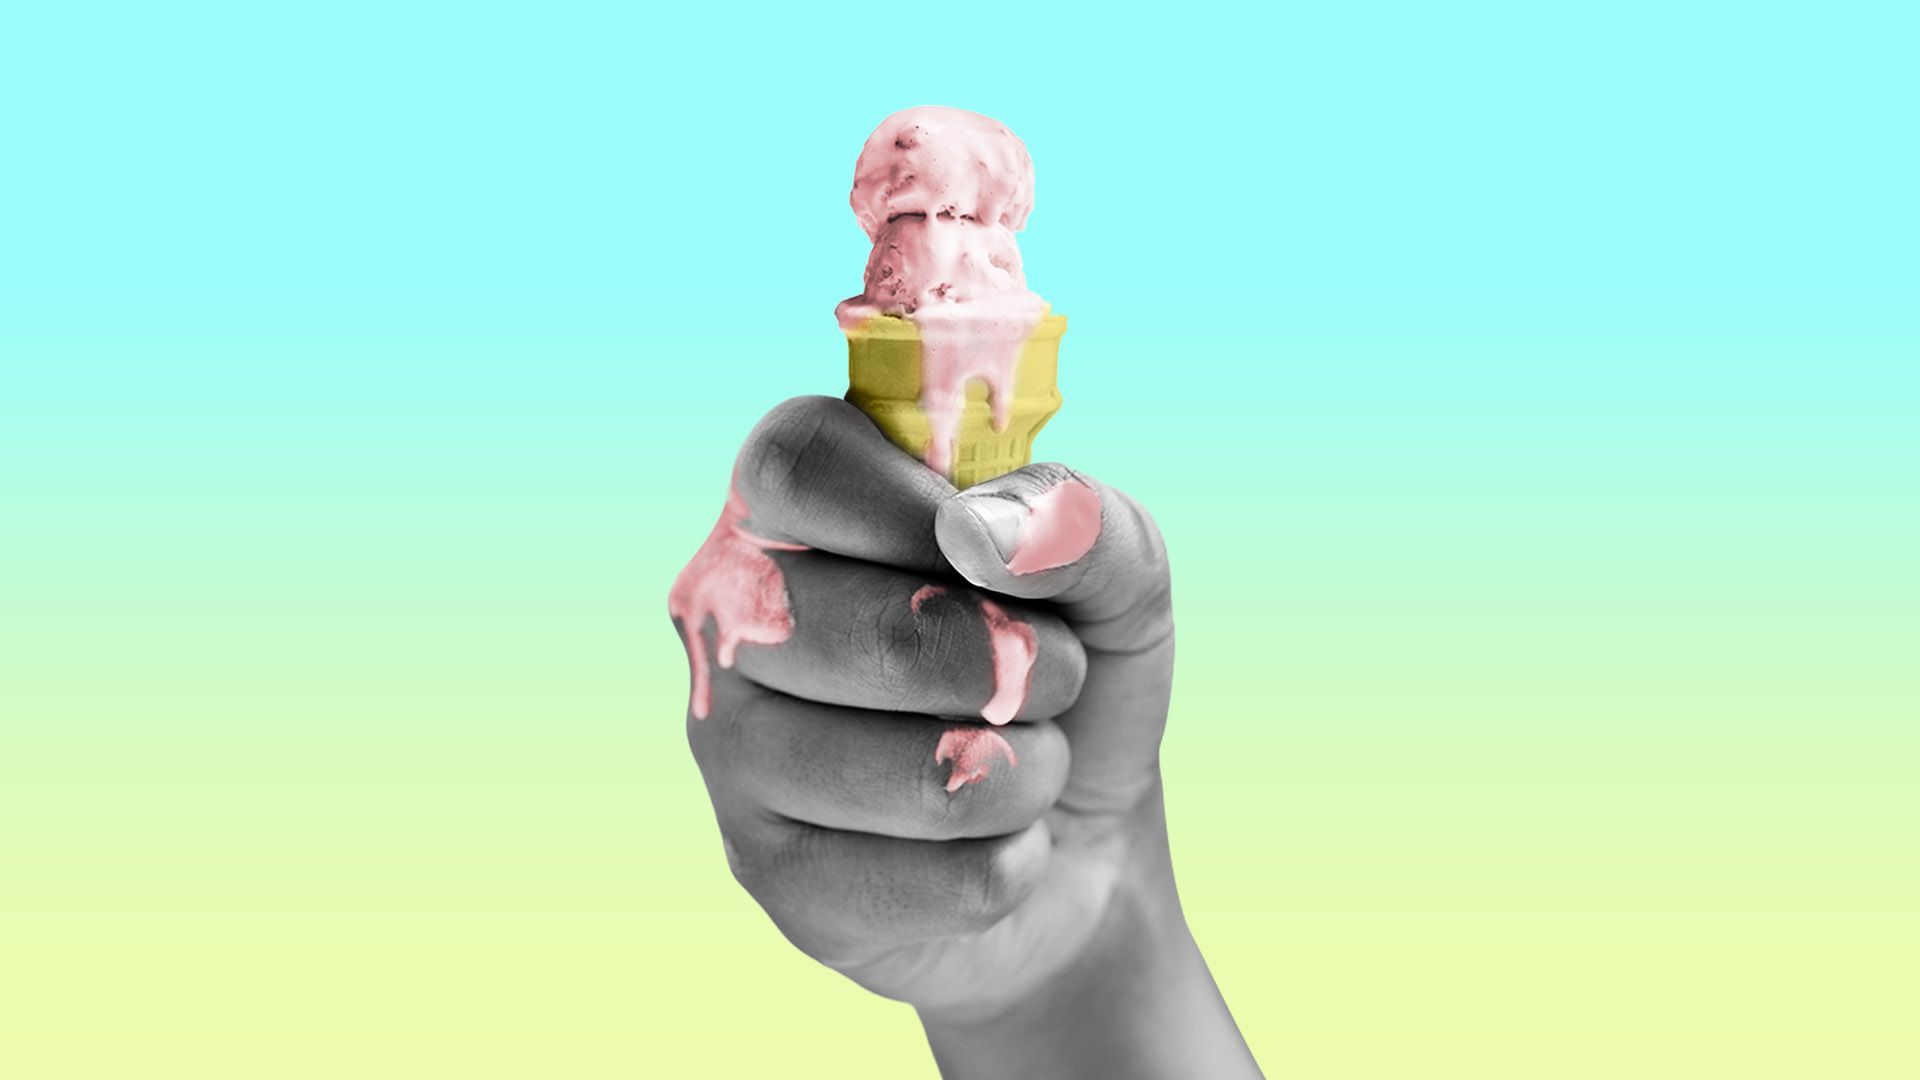 Illustration of a hand holding a tiny, melting ice cream cone